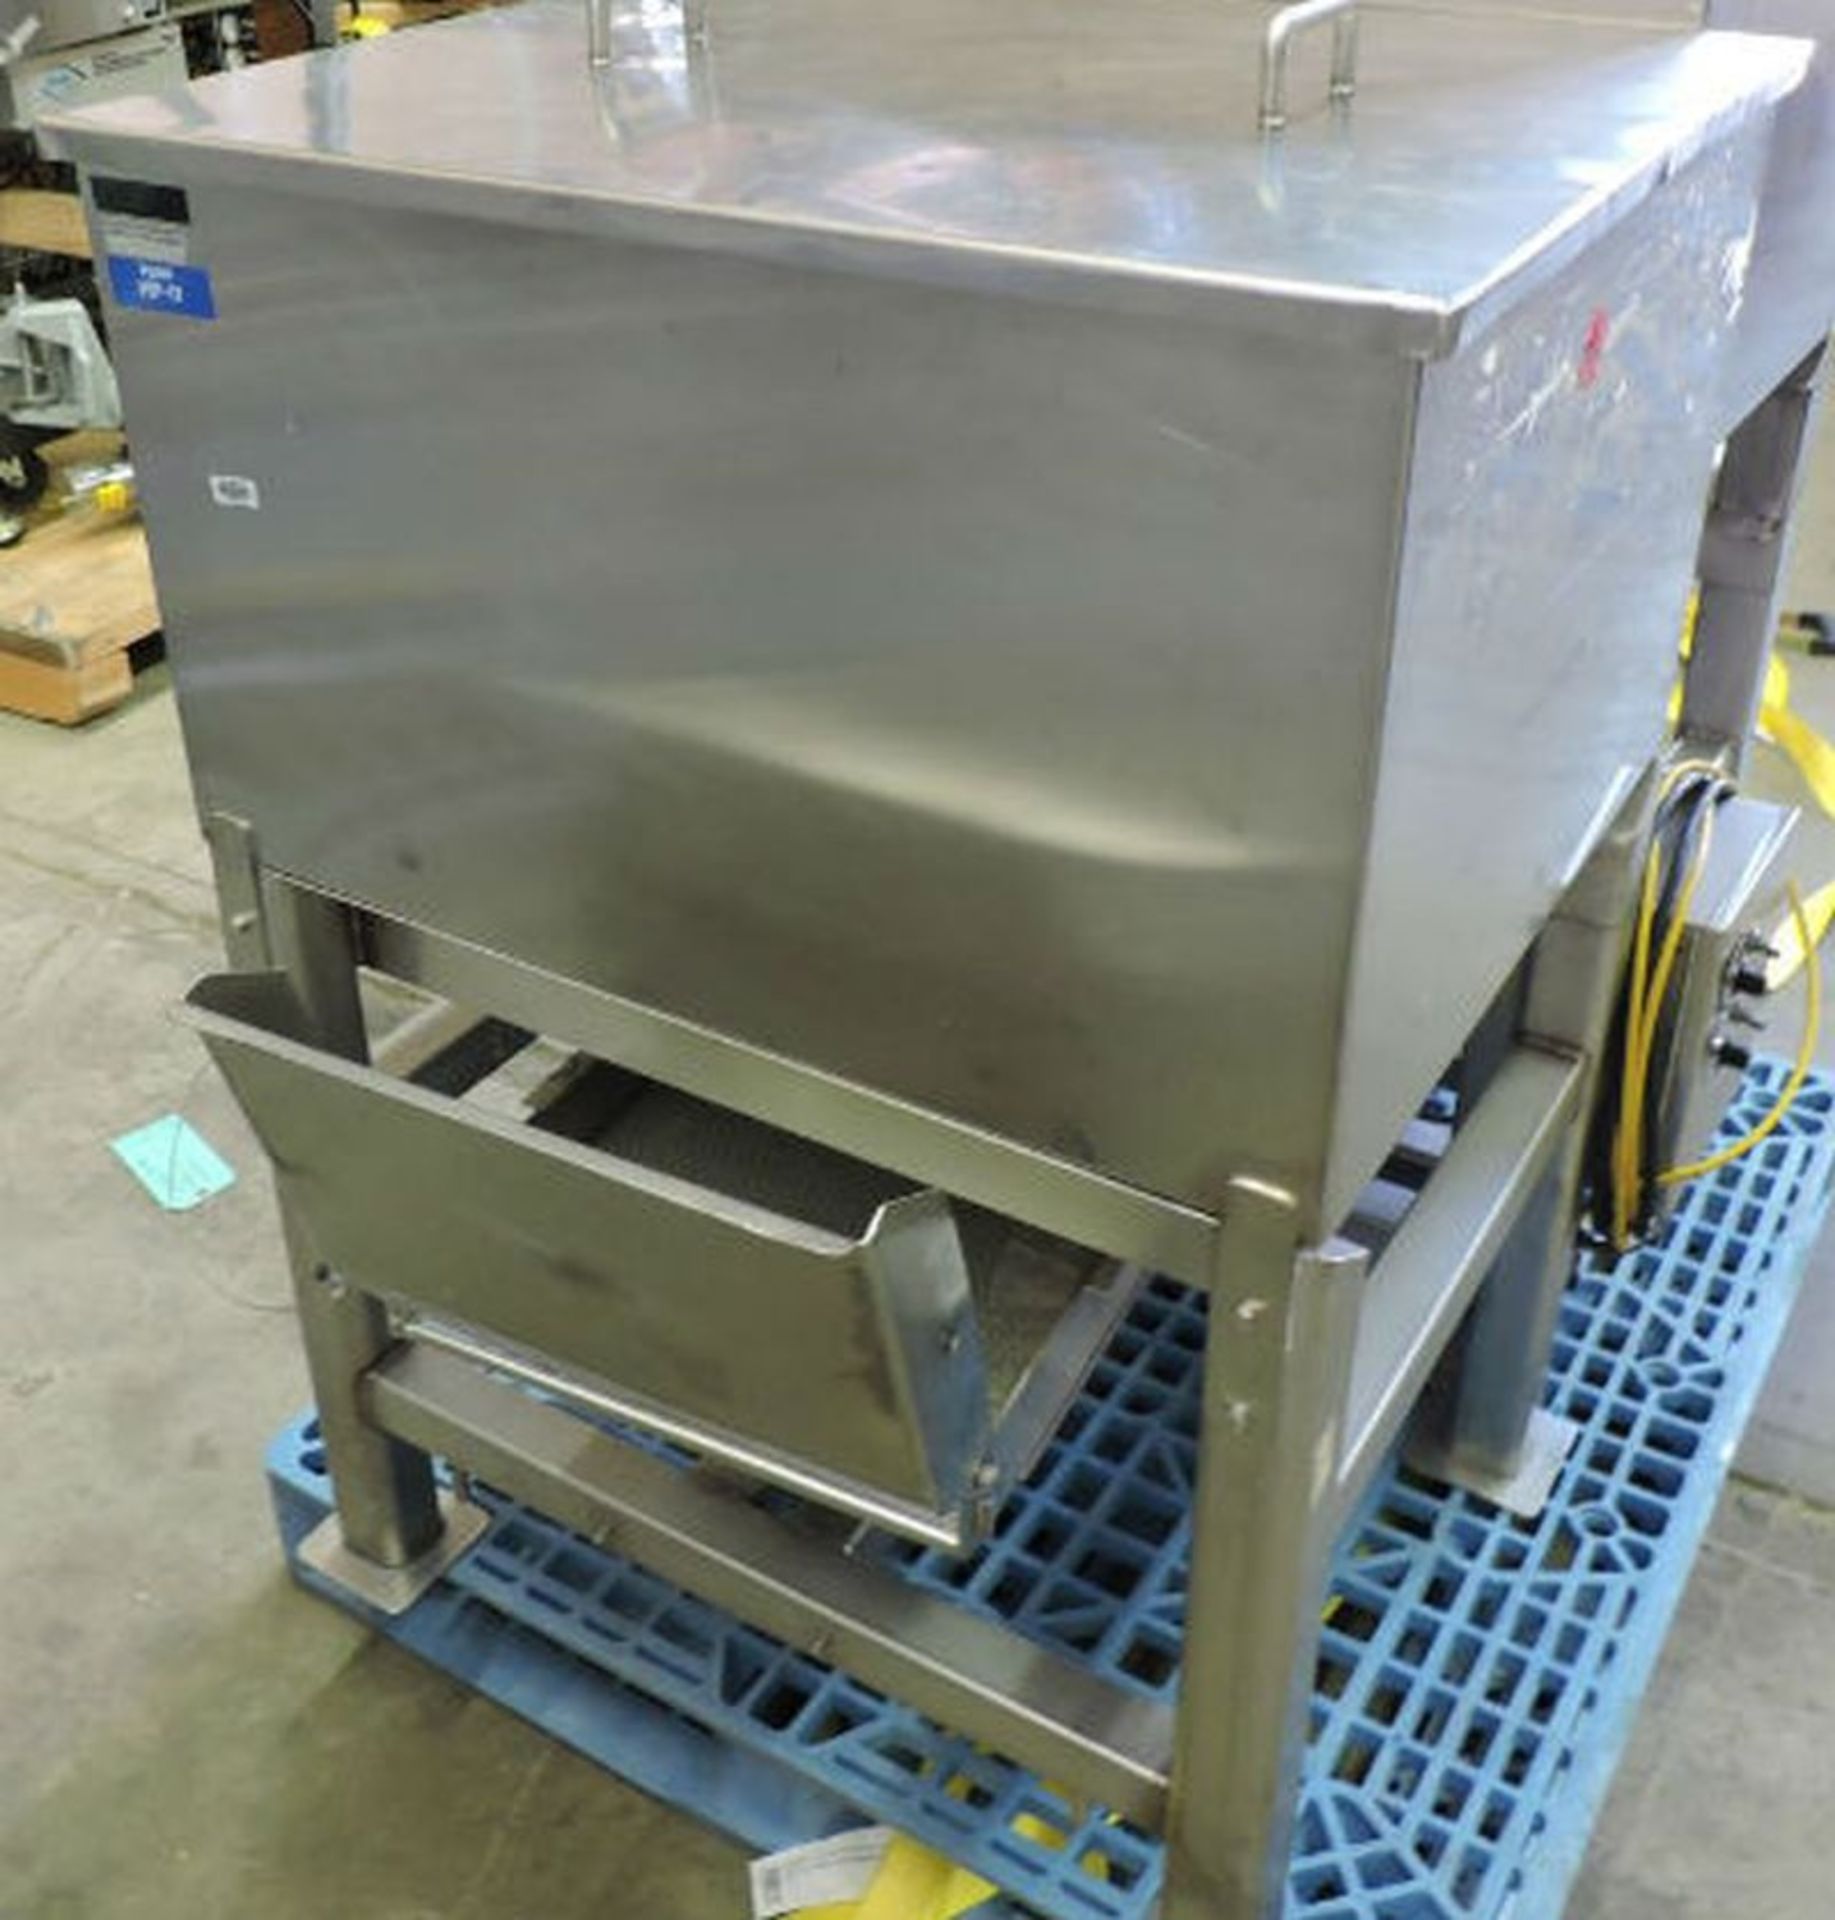 Stainless Steel Vibratory Feeder - NO RESERVE - Vibratory Feeders. Hopper Size: 23" X 29" X 17" - Image 2 of 3